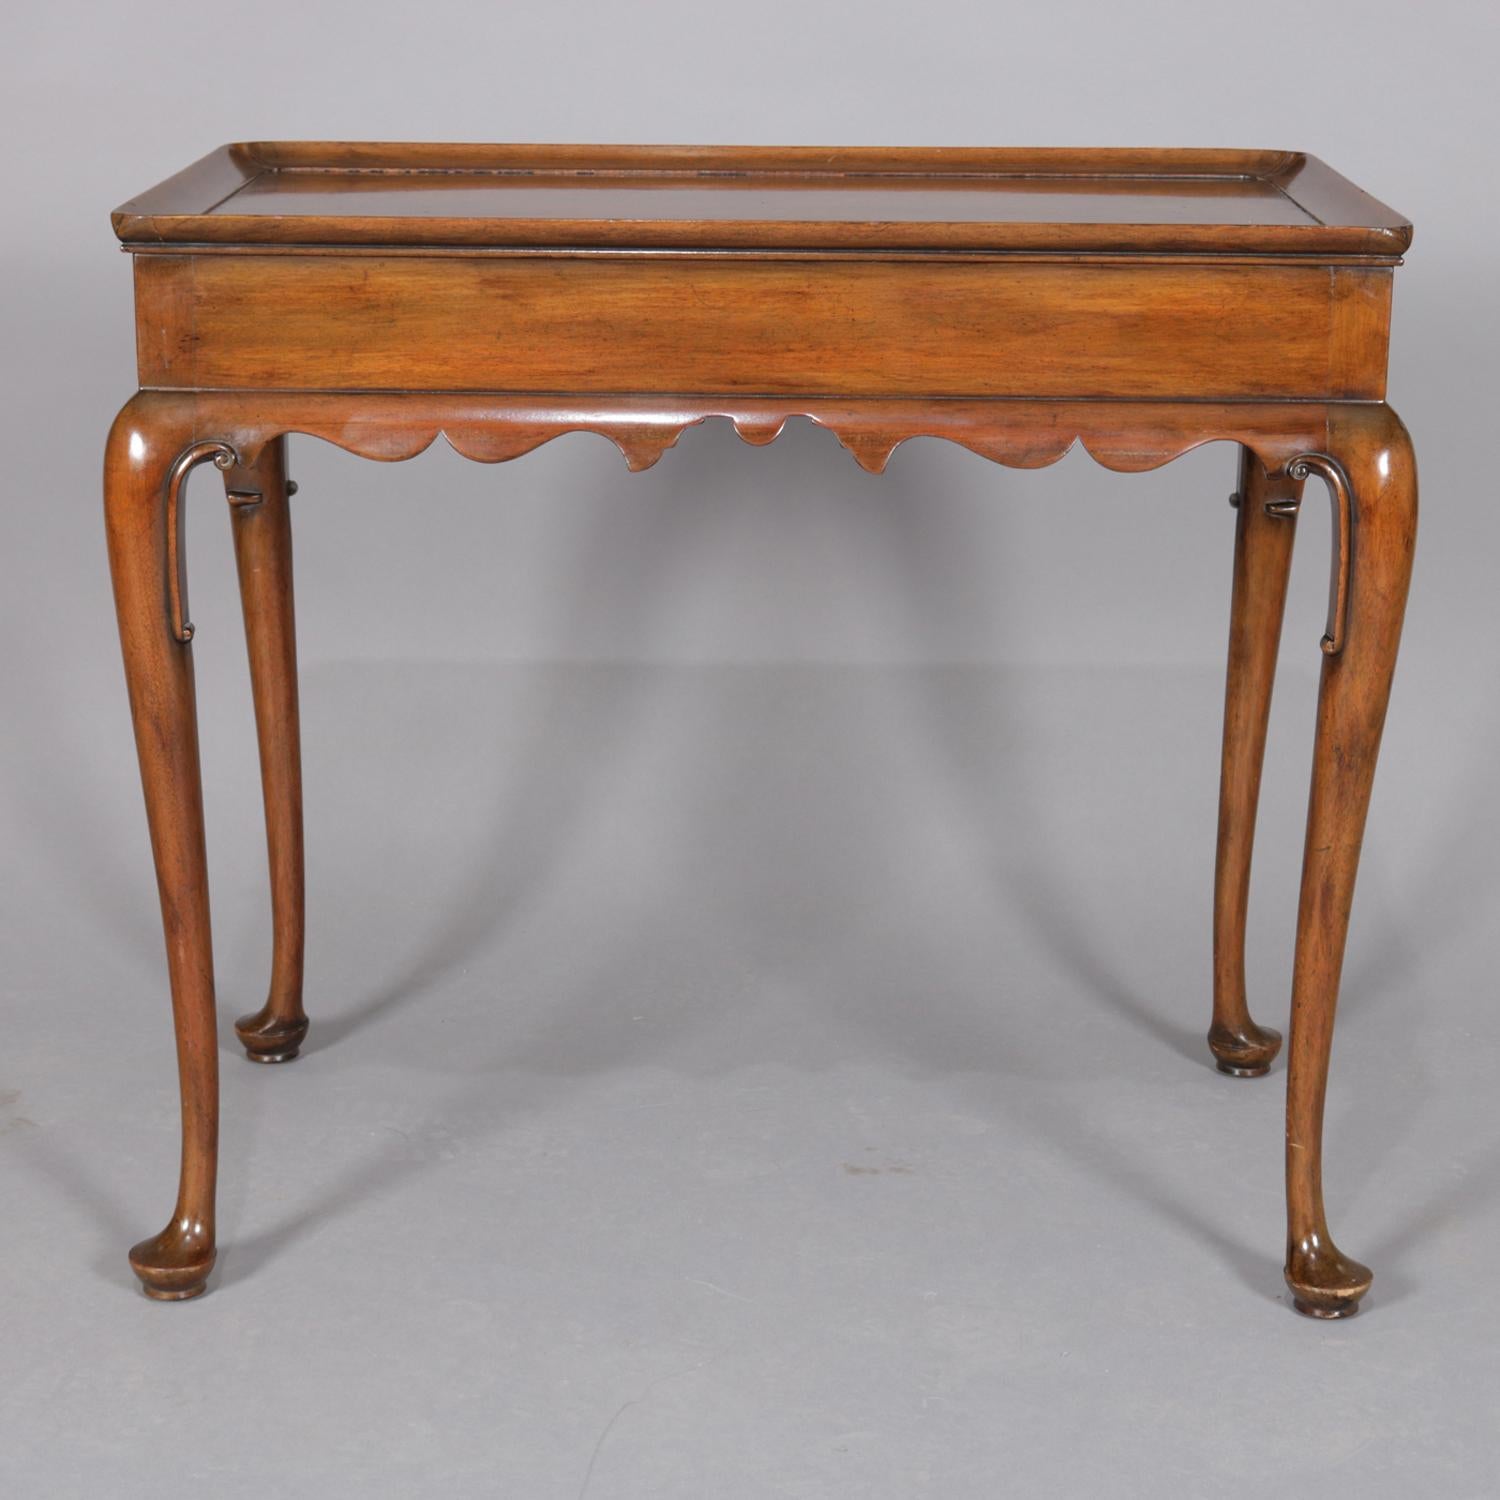 American Carved Mahogany Colonial Williamsburg Tea Table with Slides by Kittinger